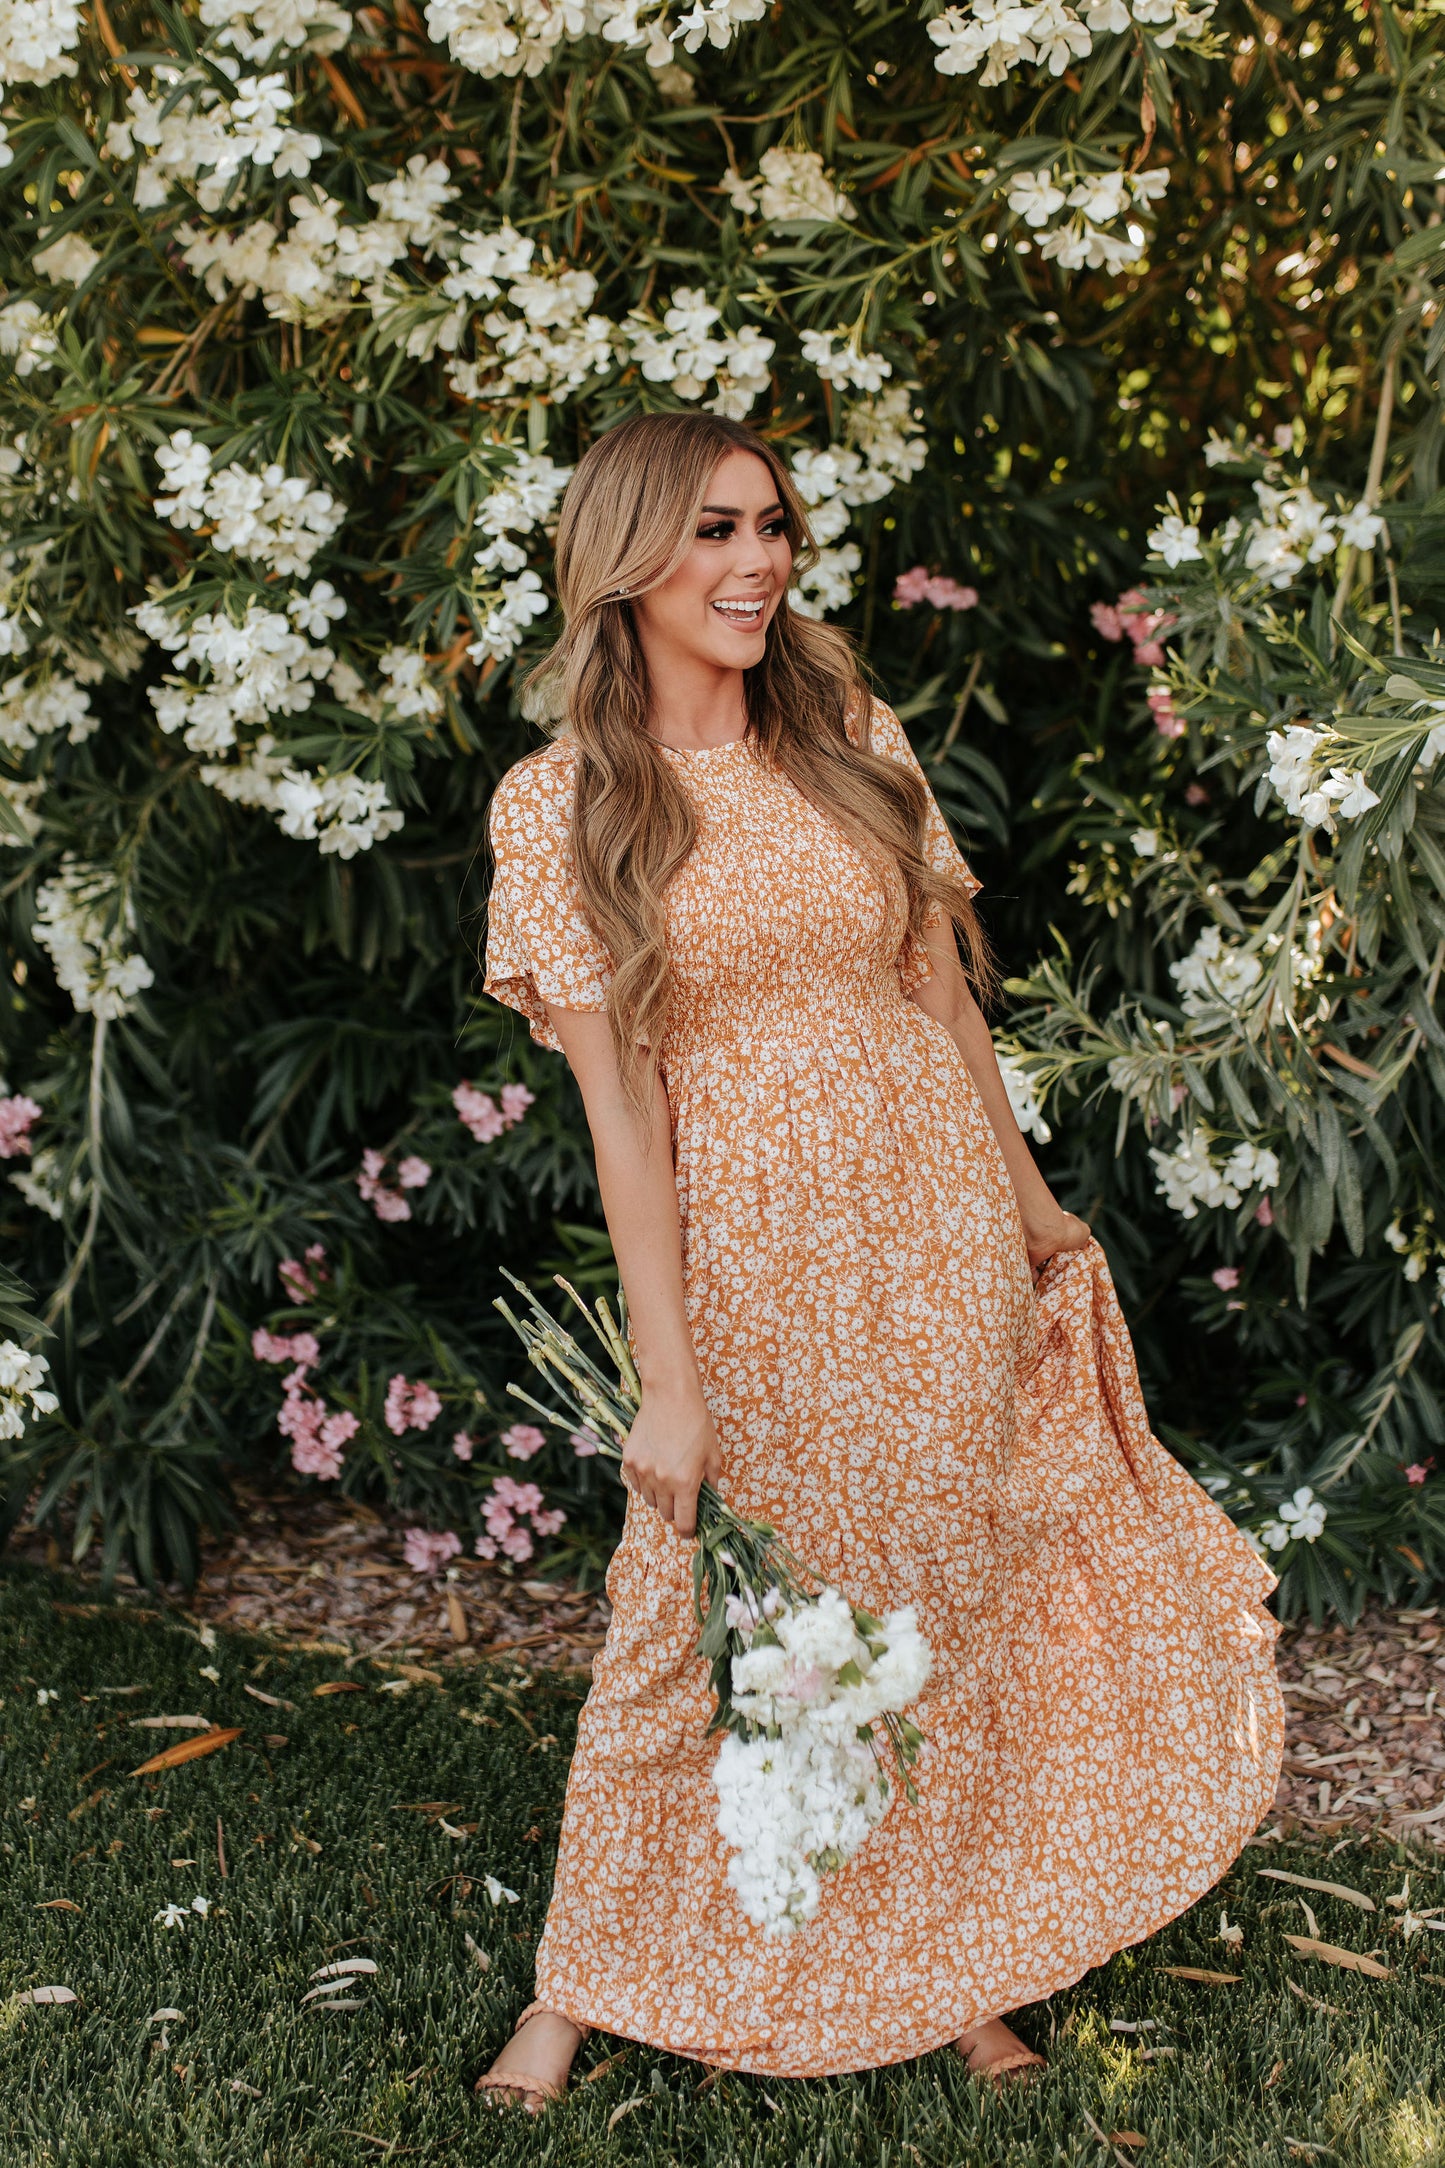 THE ESTELLE SMOCKED MAXI DRESS IN MARIGOLD